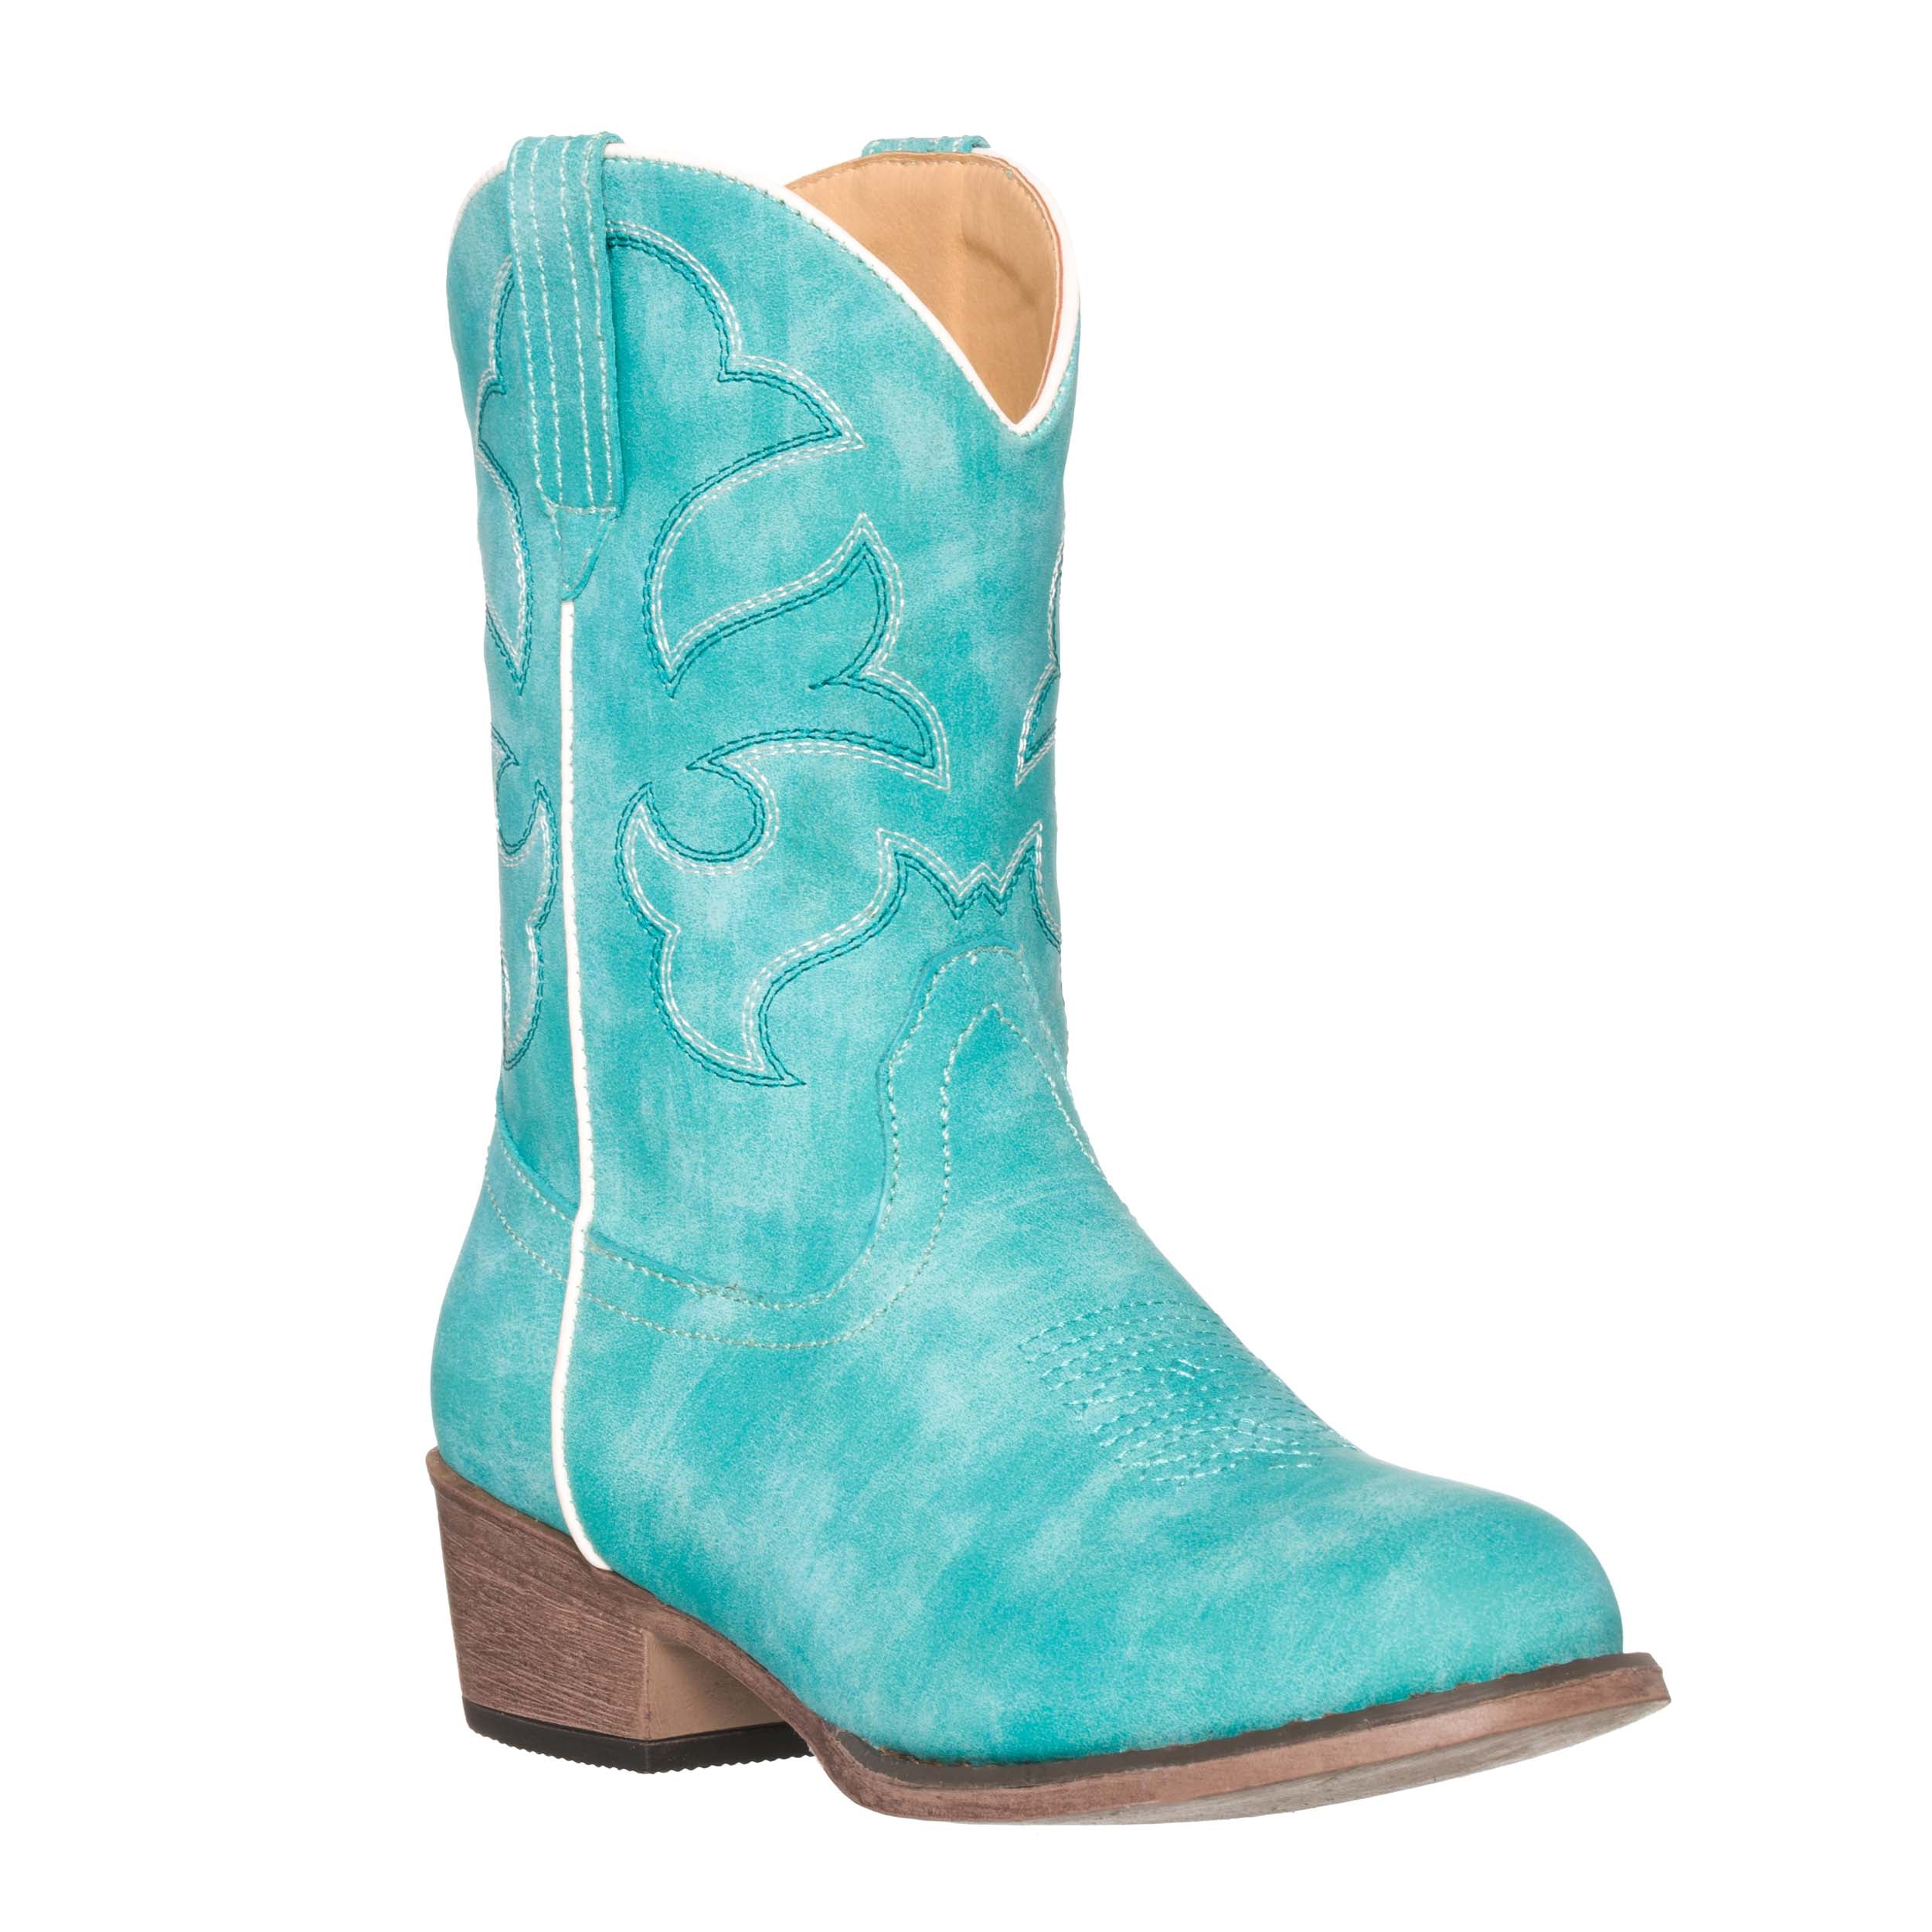 Children Western Kids Cowboy Boot | Monterey Turquoise for Girls by Silver Canyon